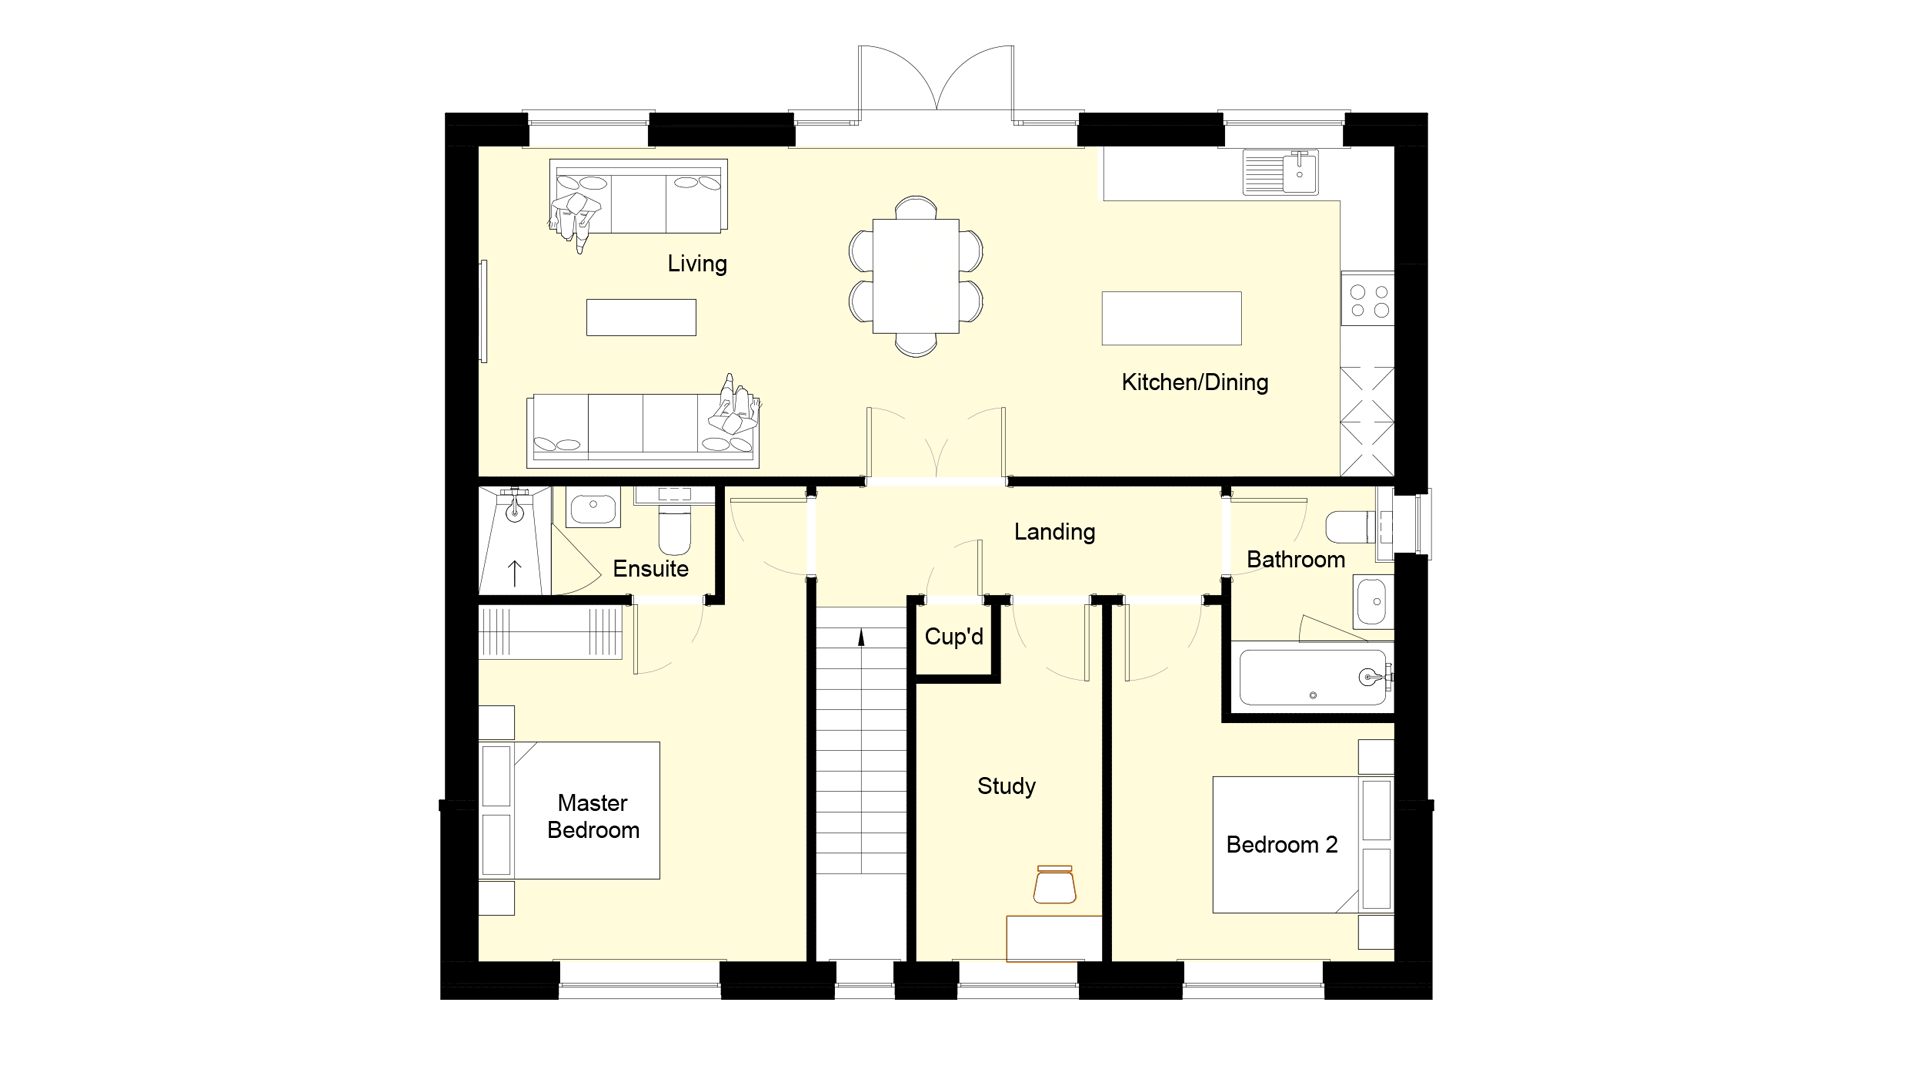 Layout of the first floor Plot 6 Woodside court.